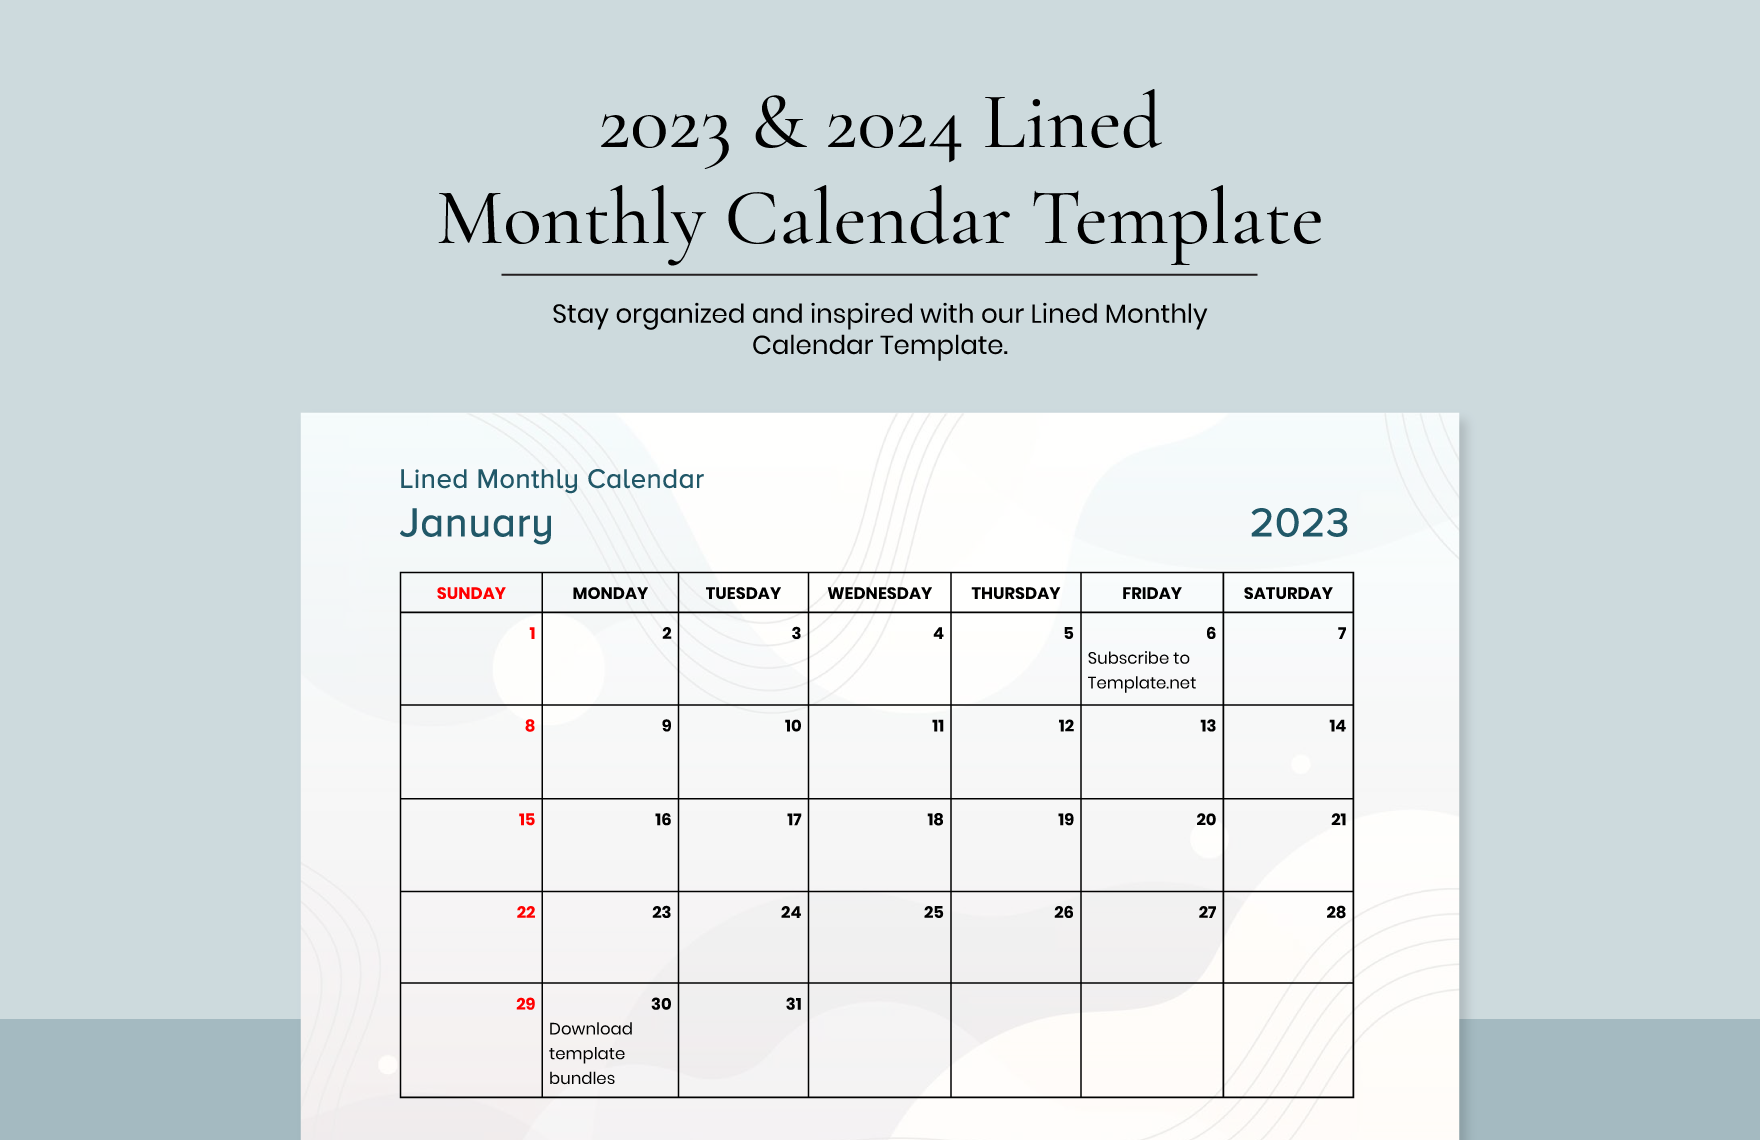 2023 & 2024 Lined Monthly Calendar Template